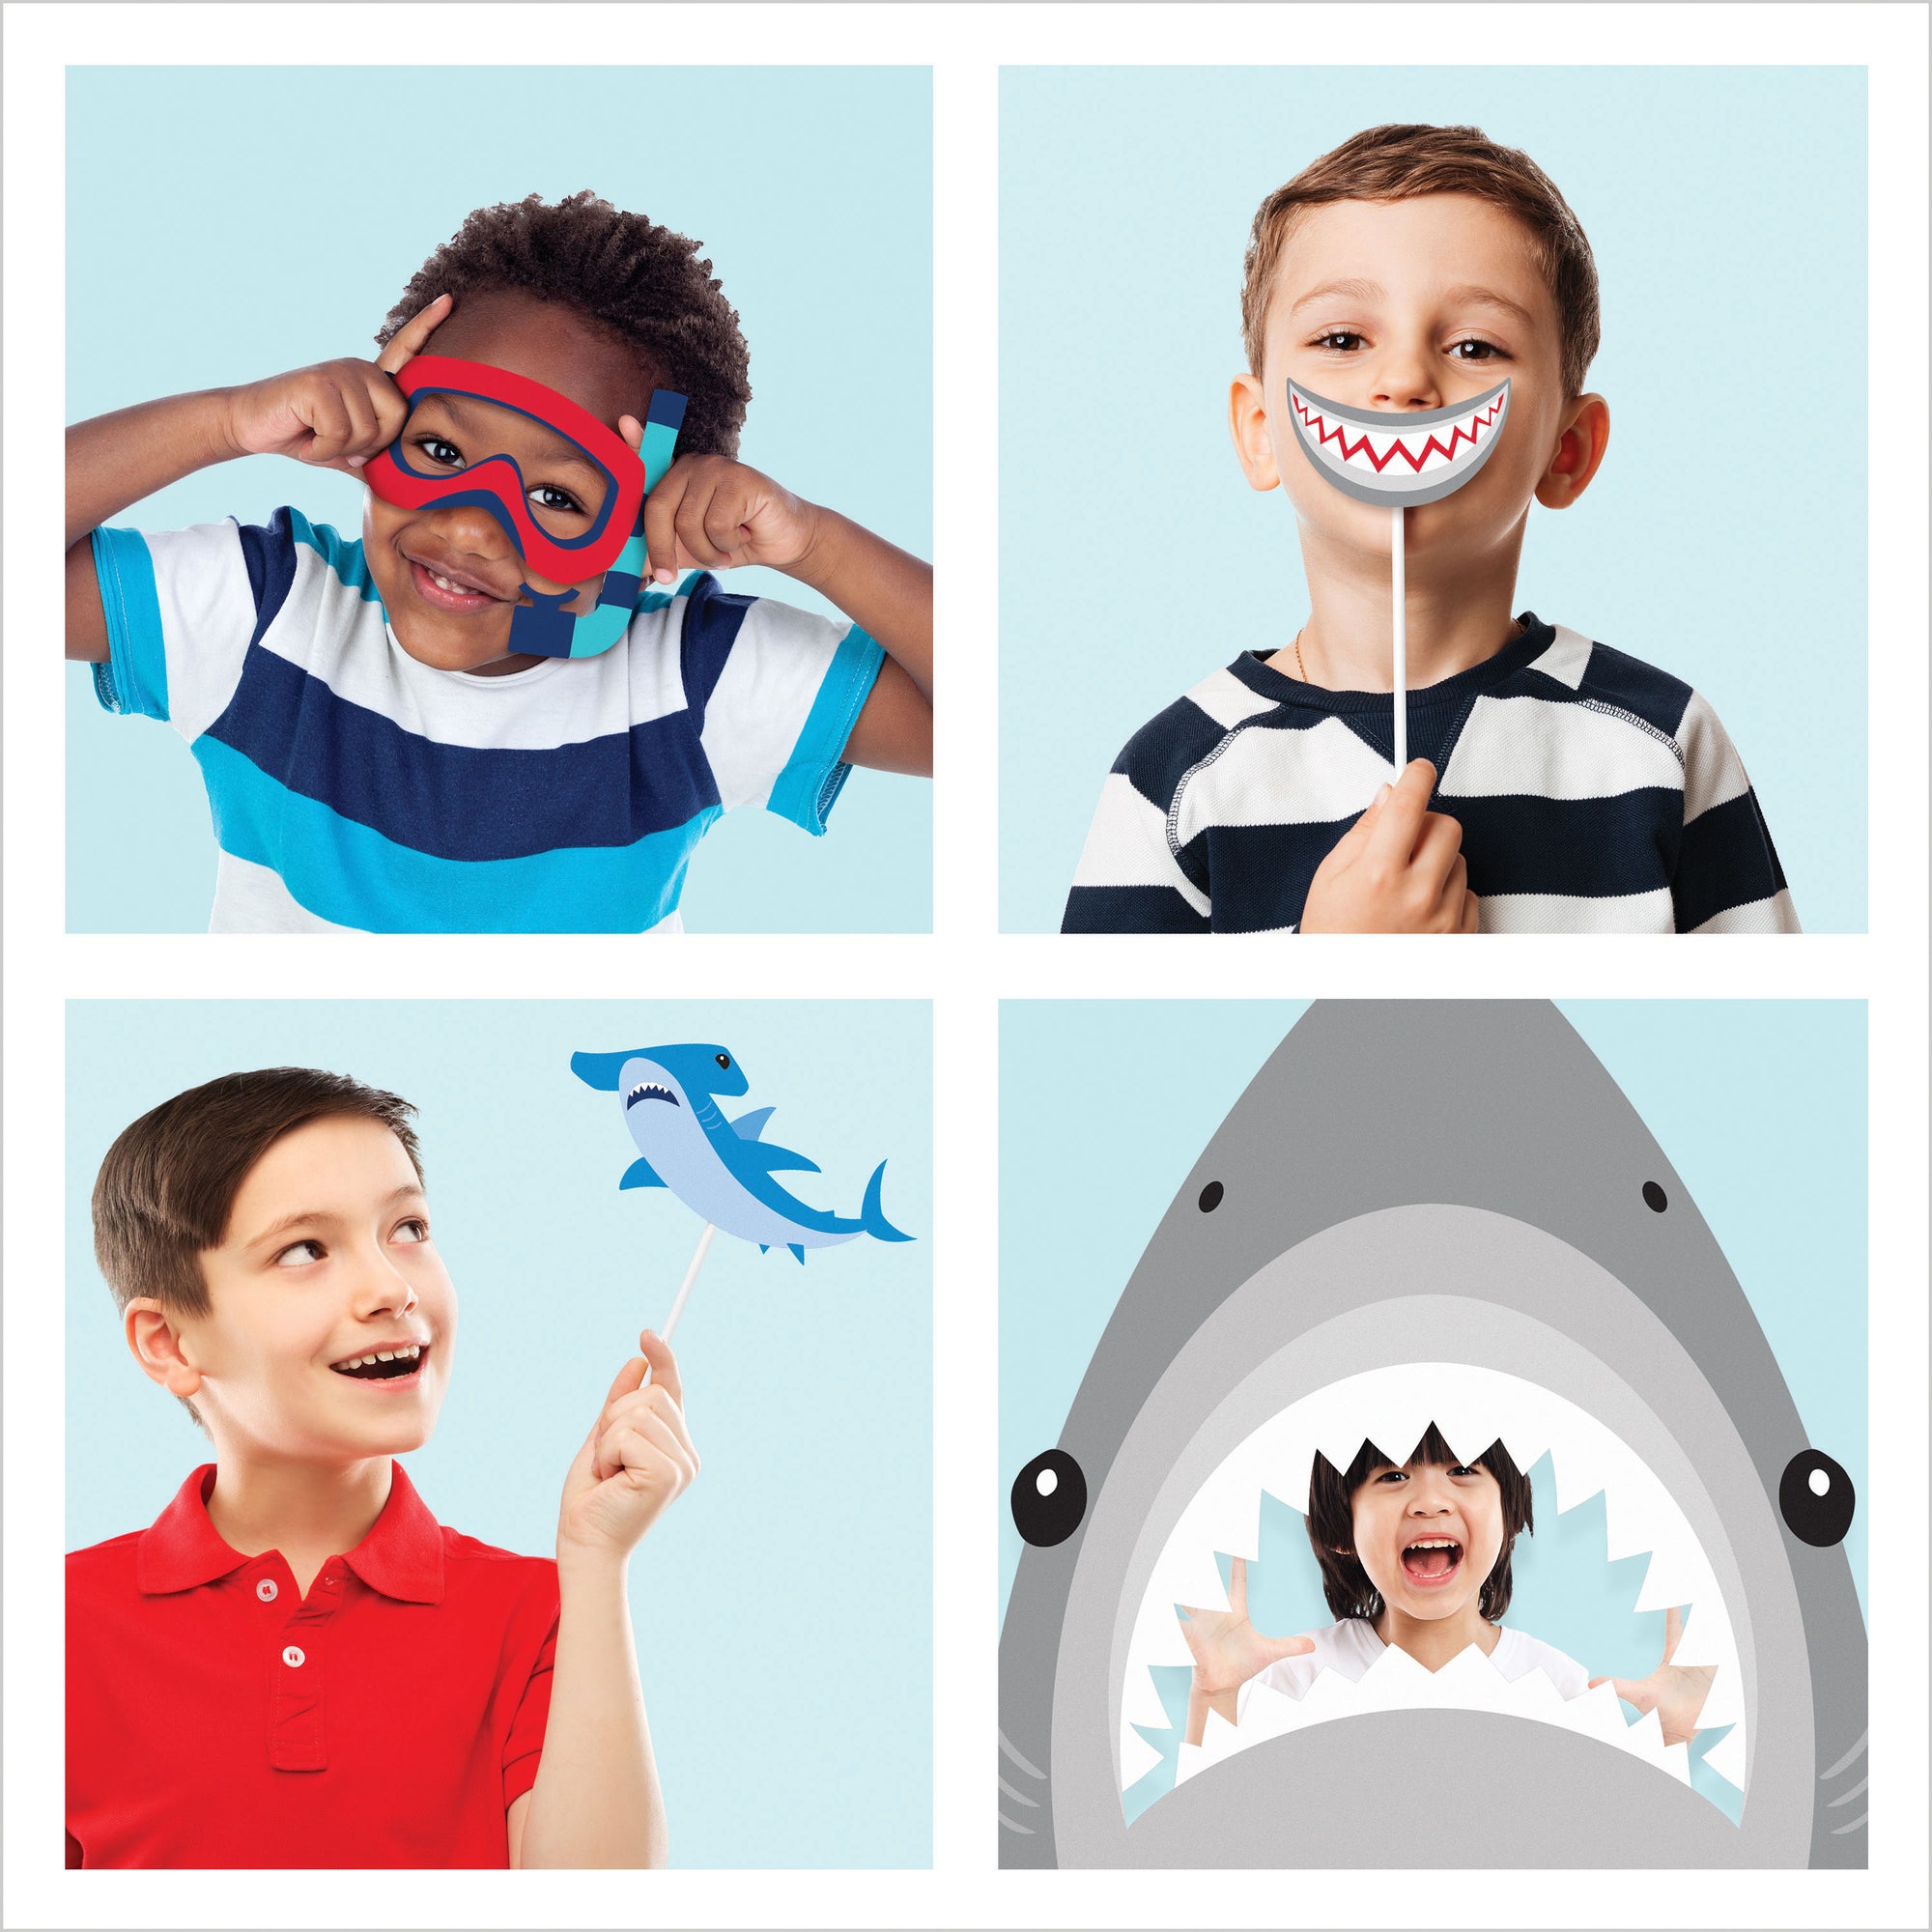 Shark Party Photo Booth Props 10ct | The Party Darling